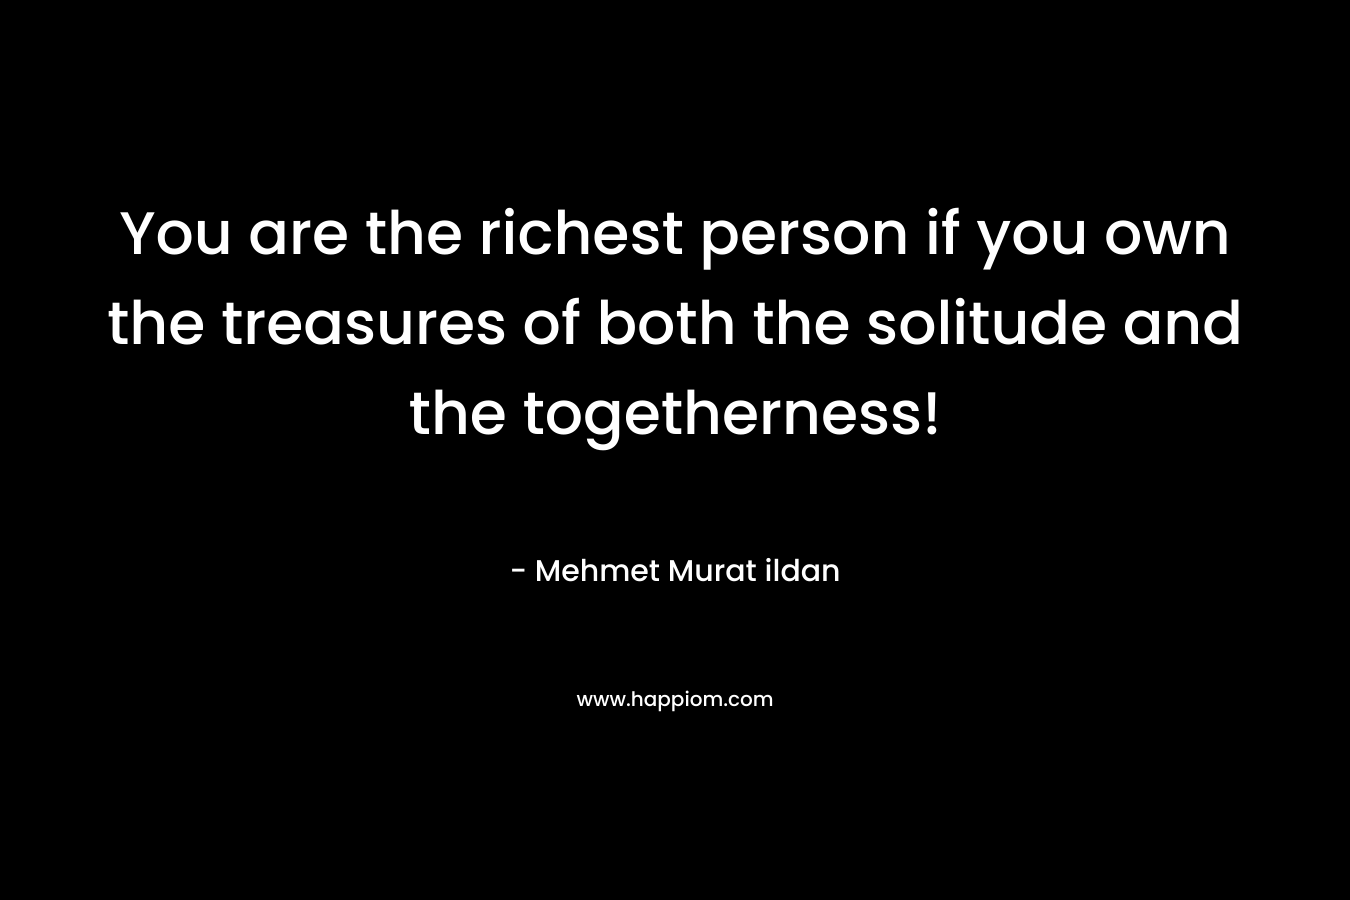 You are the richest person if you own the treasures of both the solitude and the togetherness! – Mehmet Murat ildan